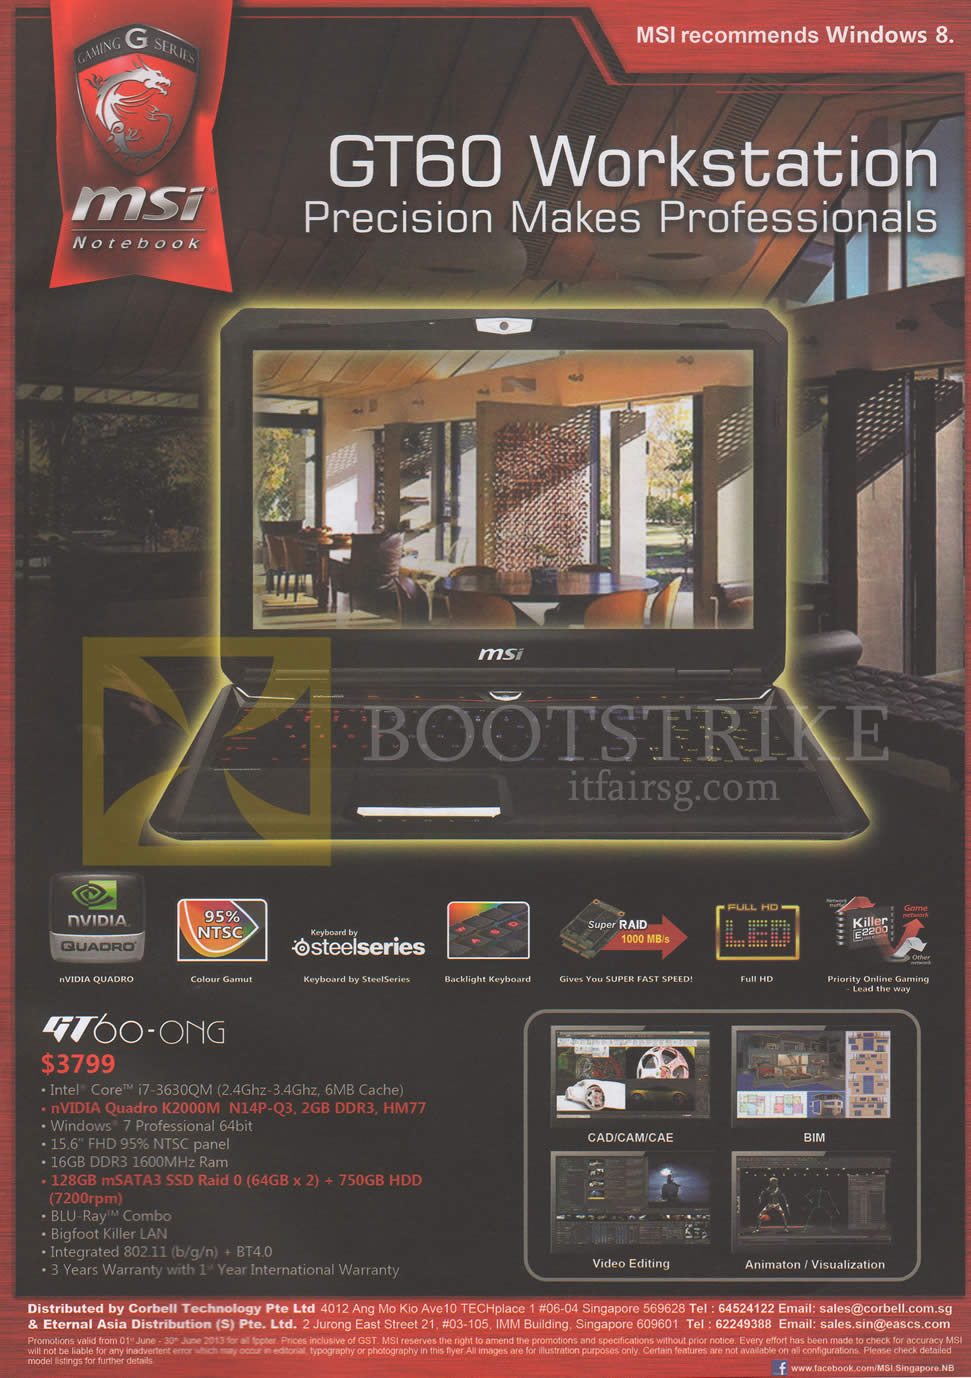 PC SHOW 2013 price list image brochure of MSI Notebook GT60-0NG